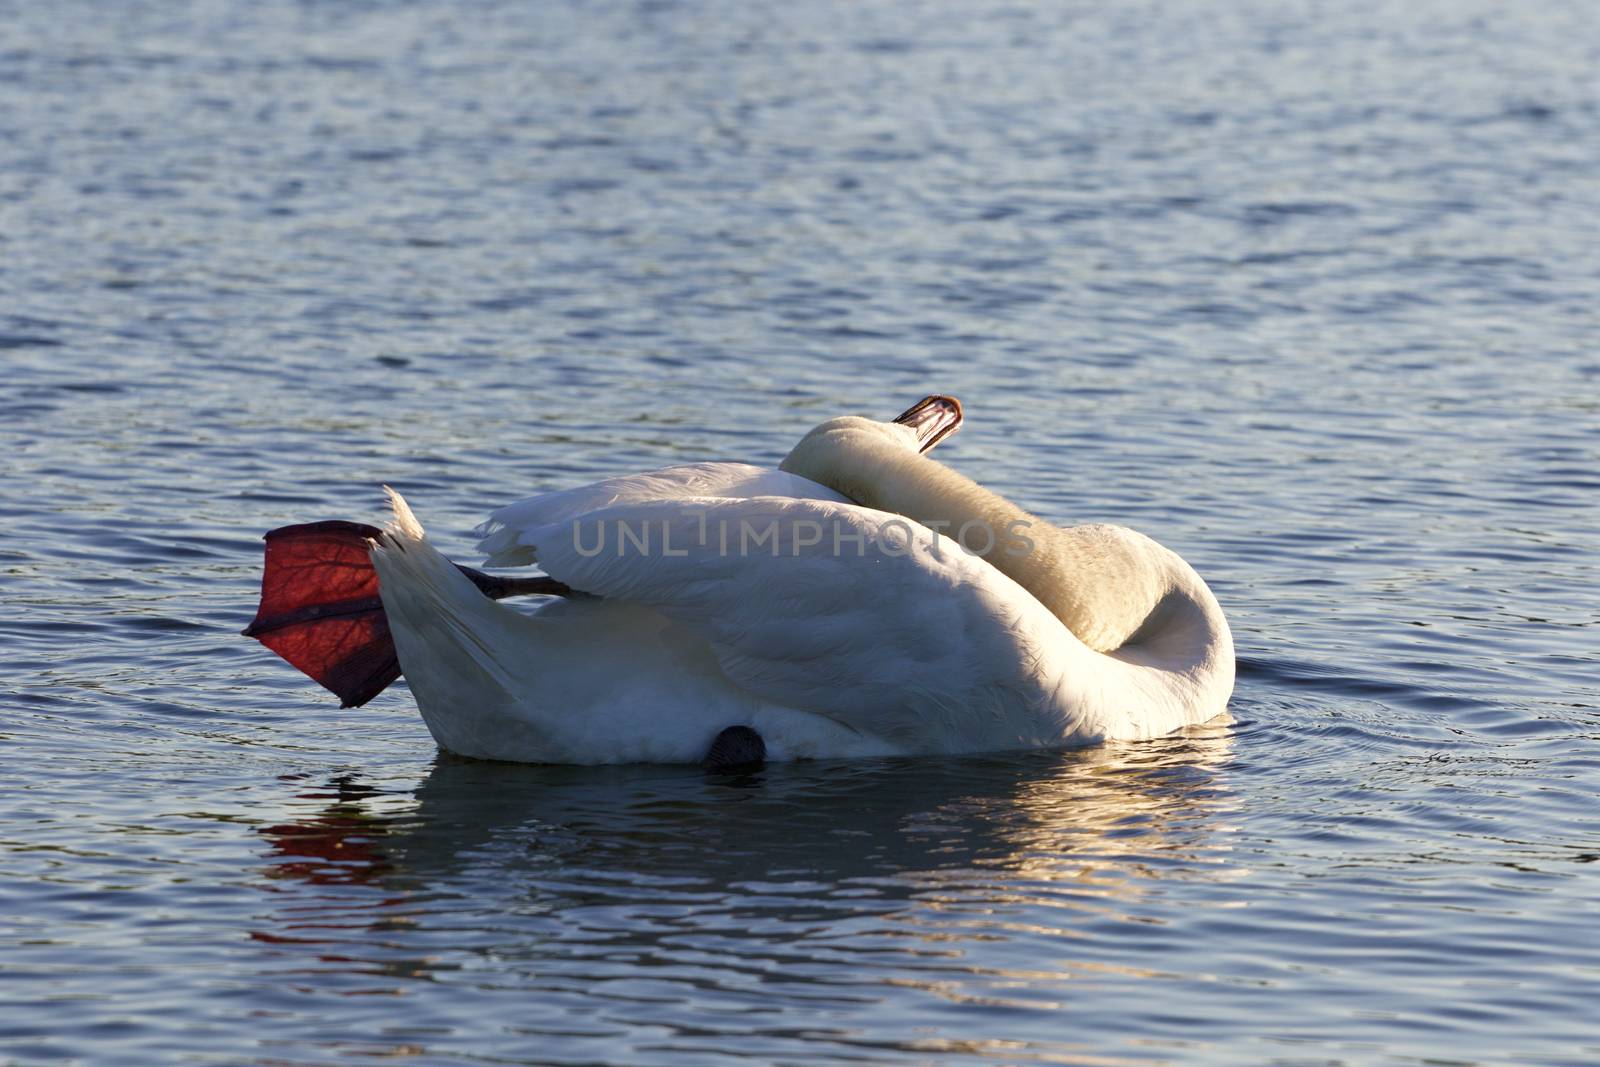 Yoga lessons from the beautiful mute swan 